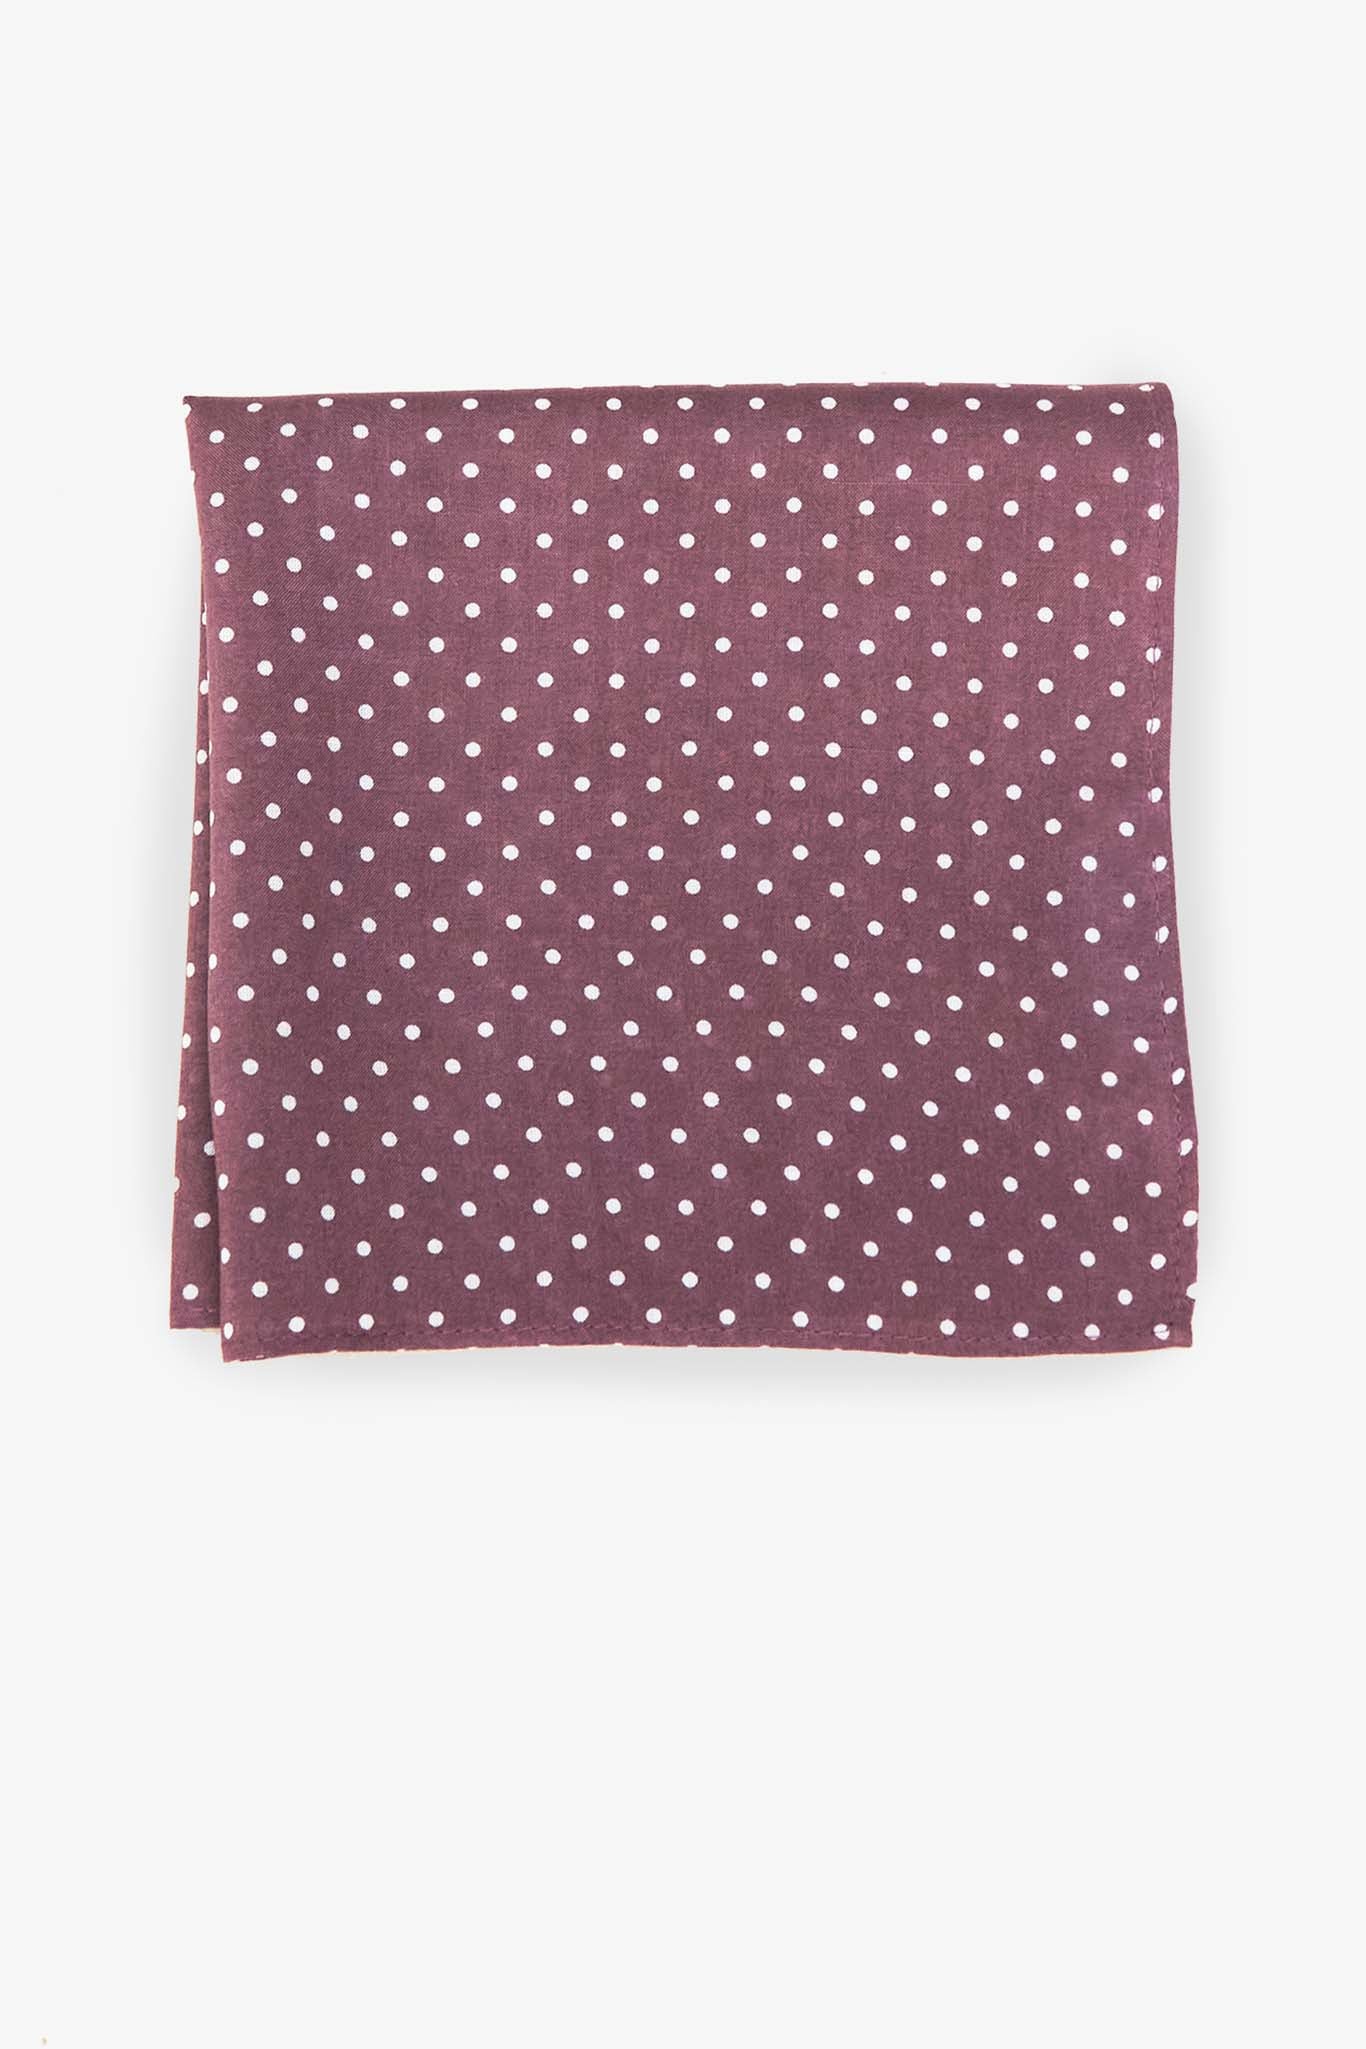 Didi Pocket Square in dark mauve dot by Birdy Grey, front view